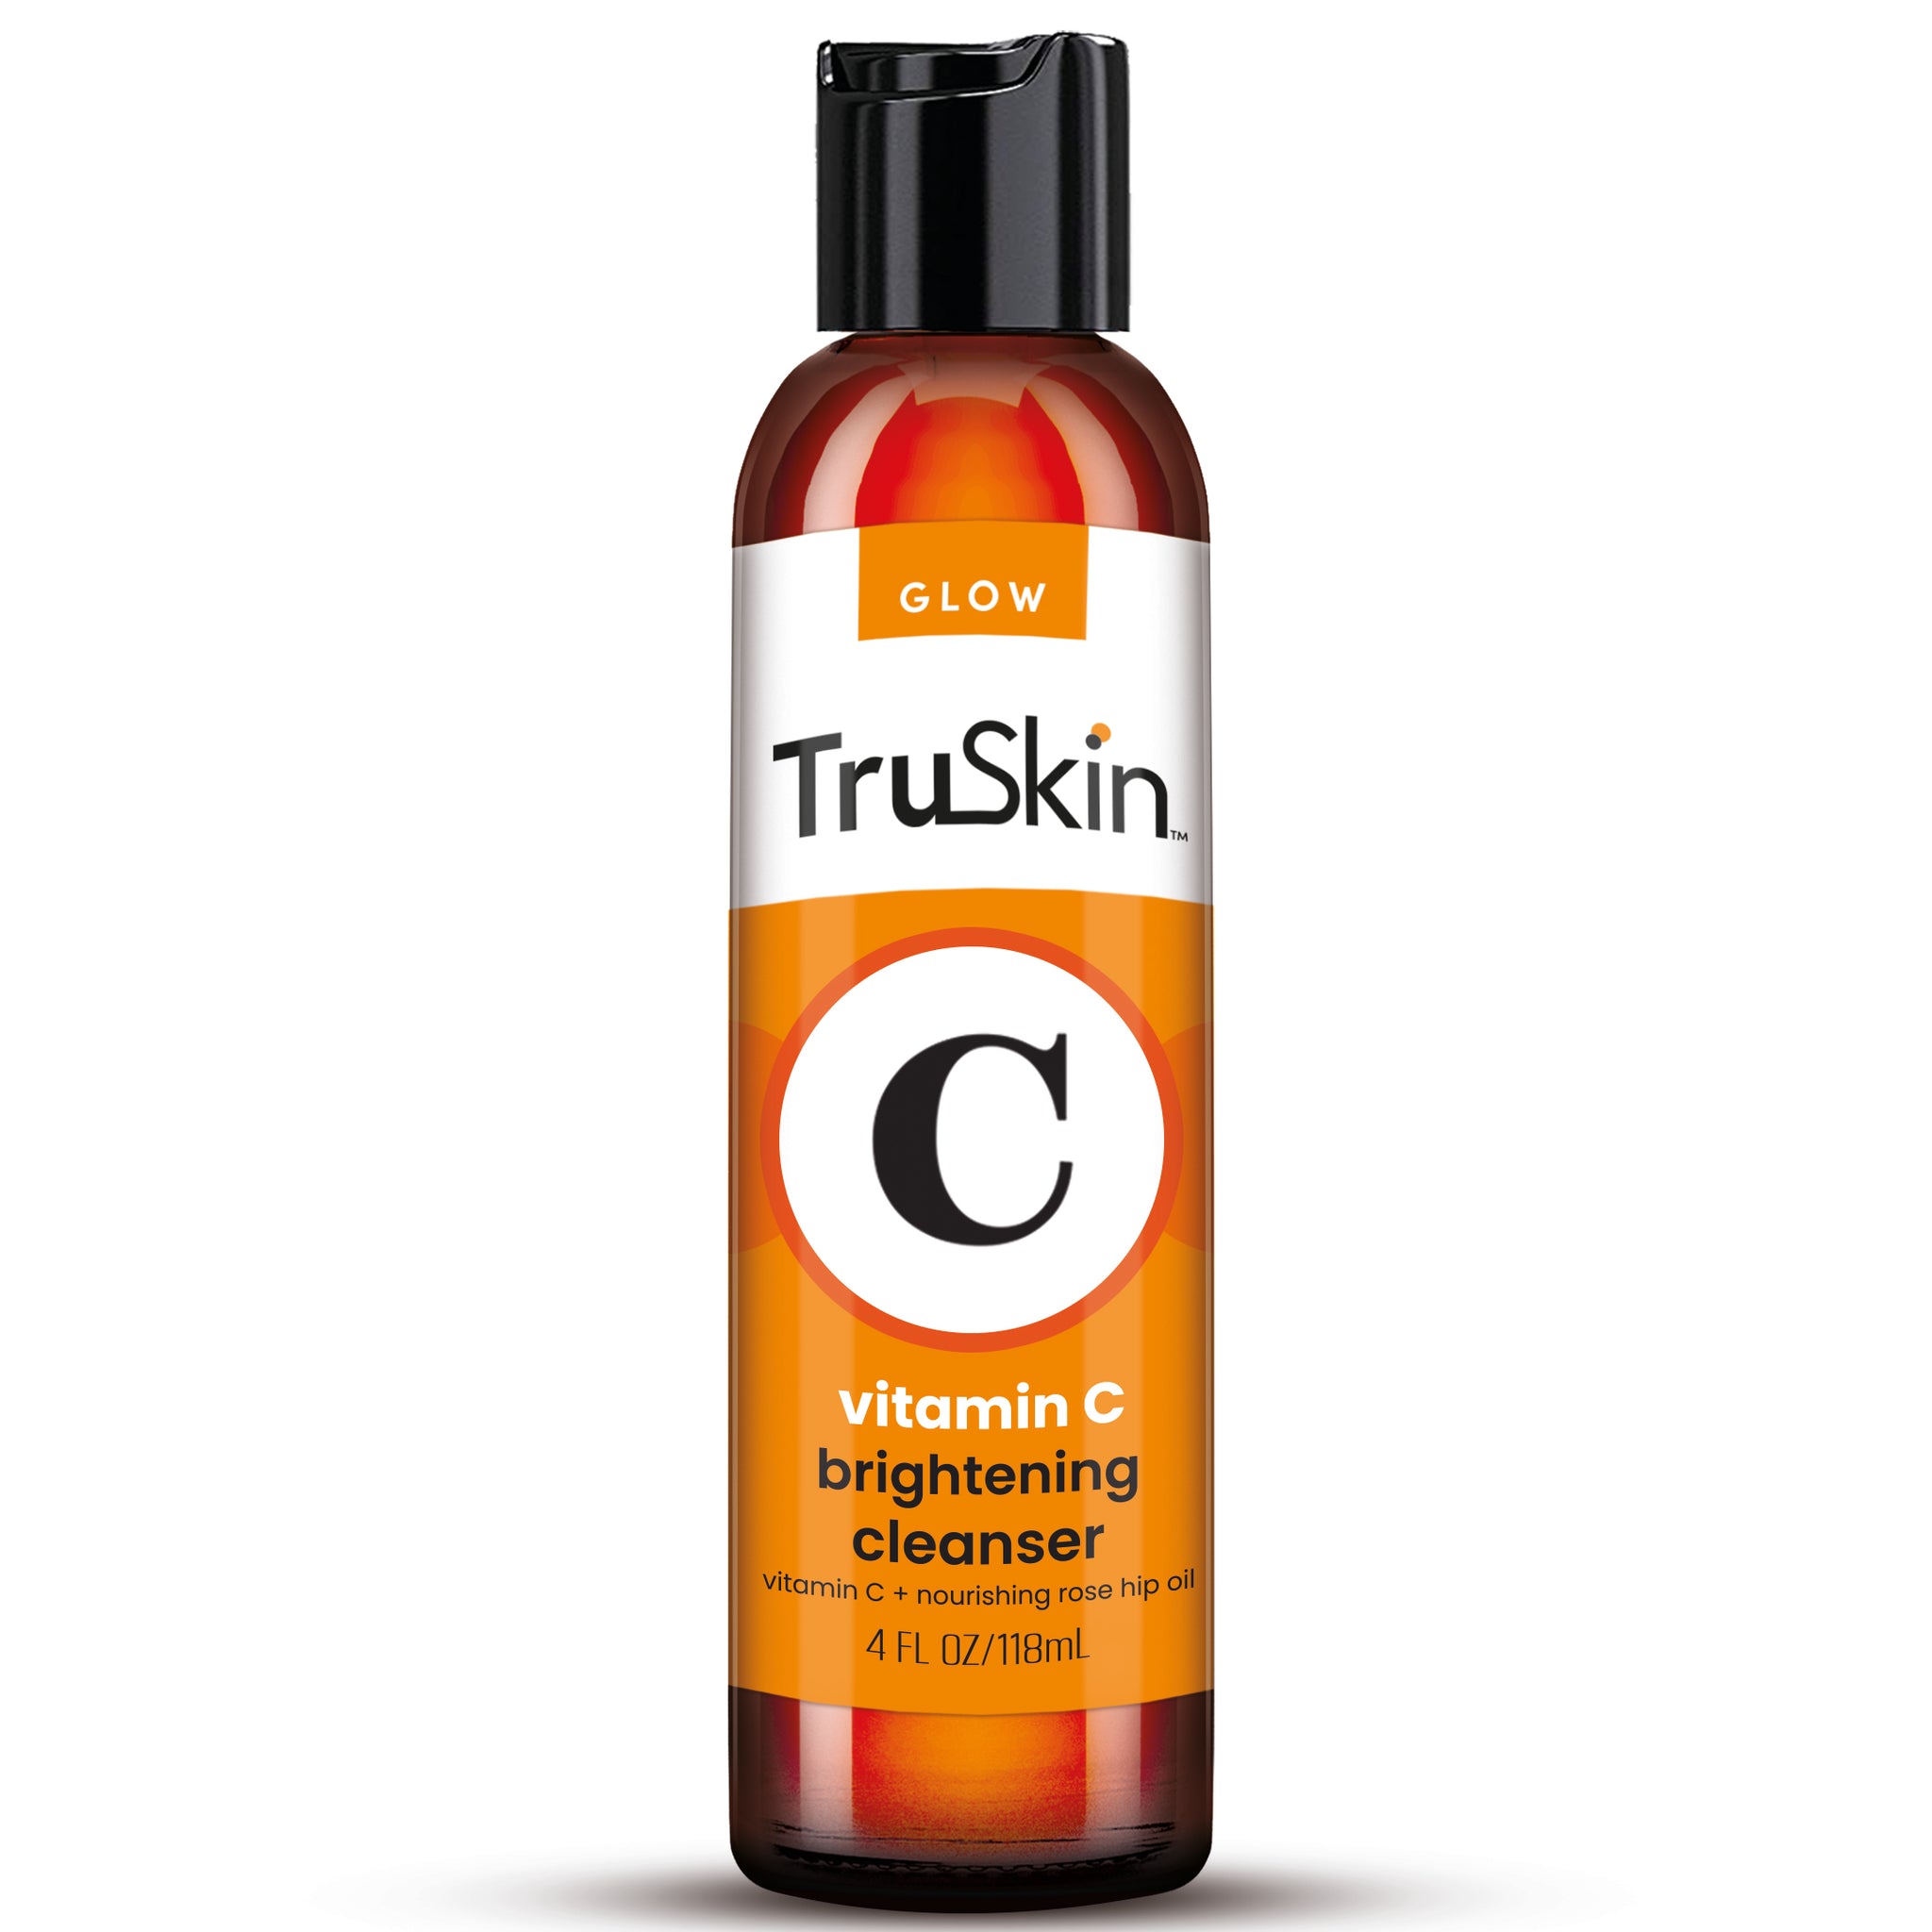 TruSkin Vitamin C Facial Cleanser, Brightening Anti-Aging Face Wash Blend includes Vitamin E, Tea Tree Oil, Rosehip Oil & Aloe Vera, for Daily Use to Fight UV Damage to Skin & Fight Acne, 4 fl oz